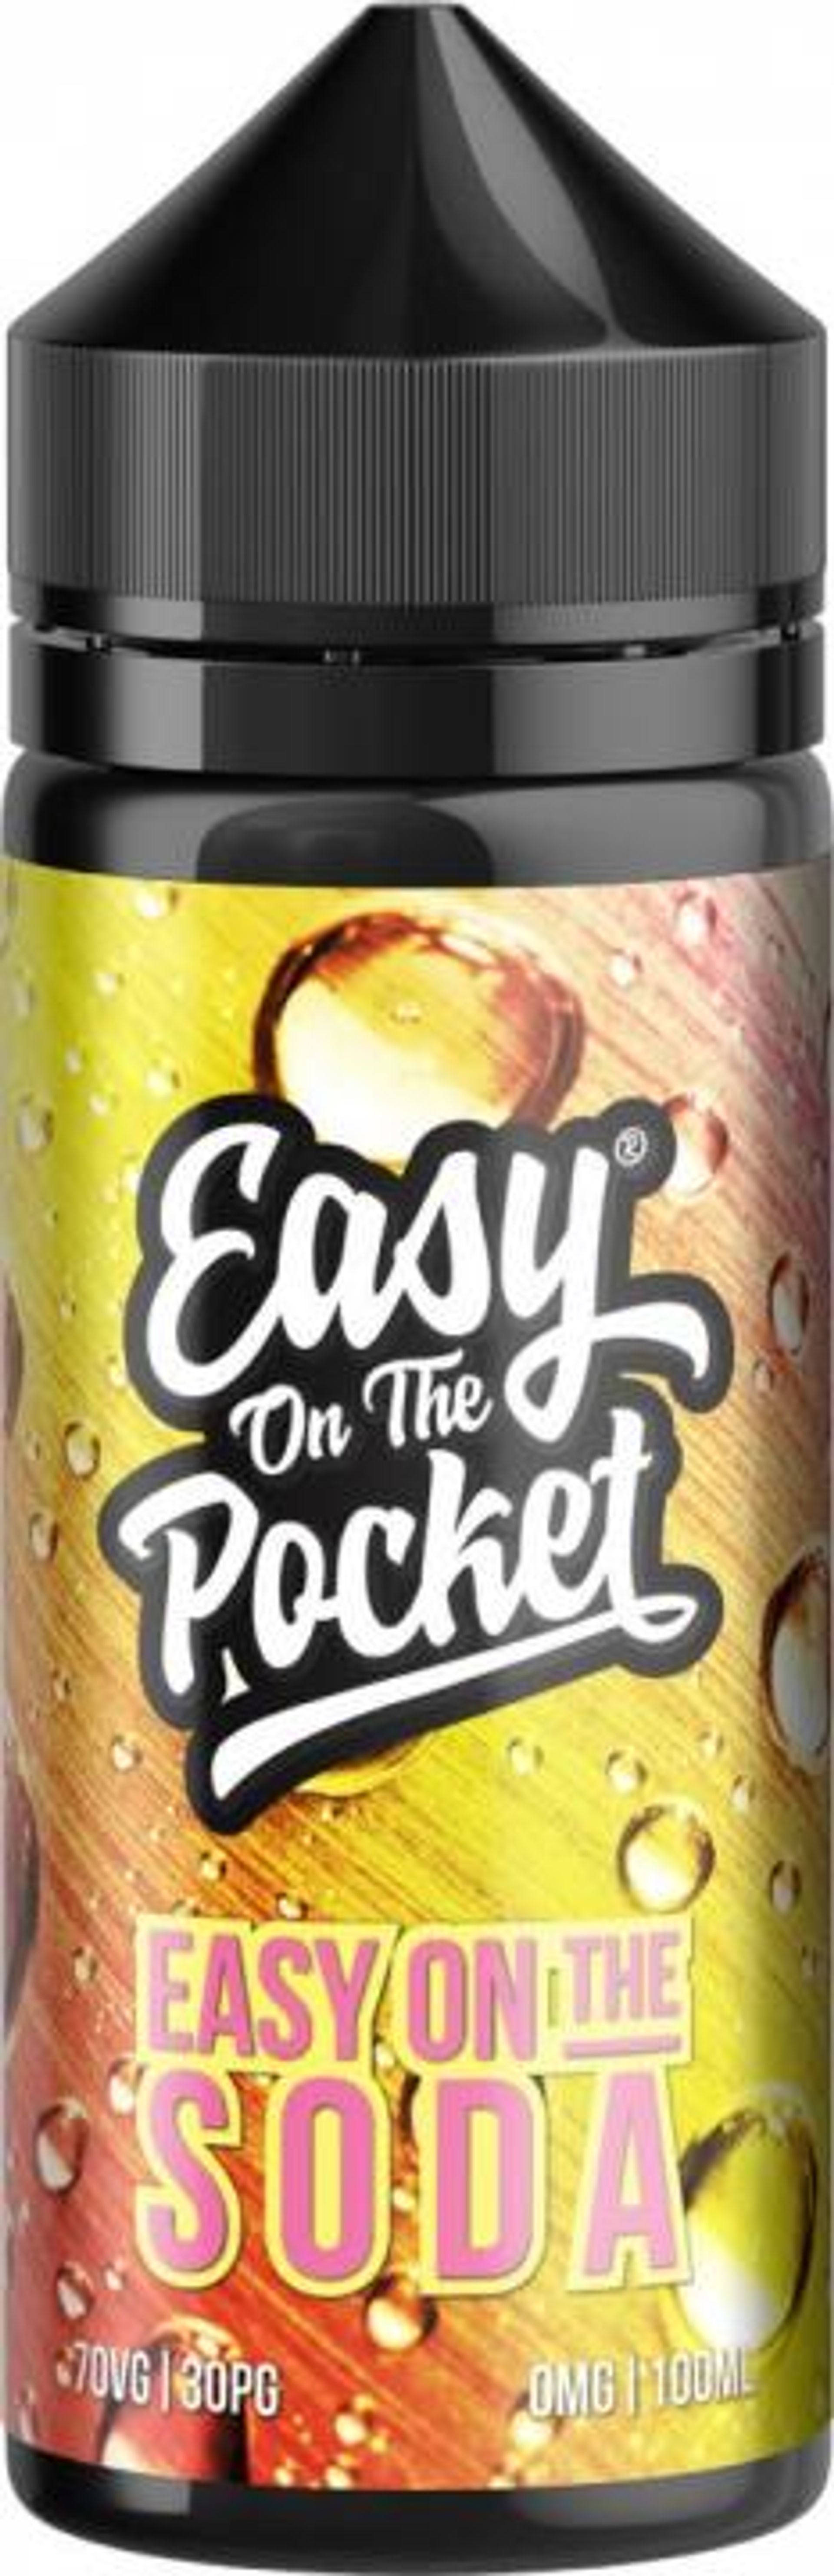 Image of Easy On The Soda by Easy On The Pocket